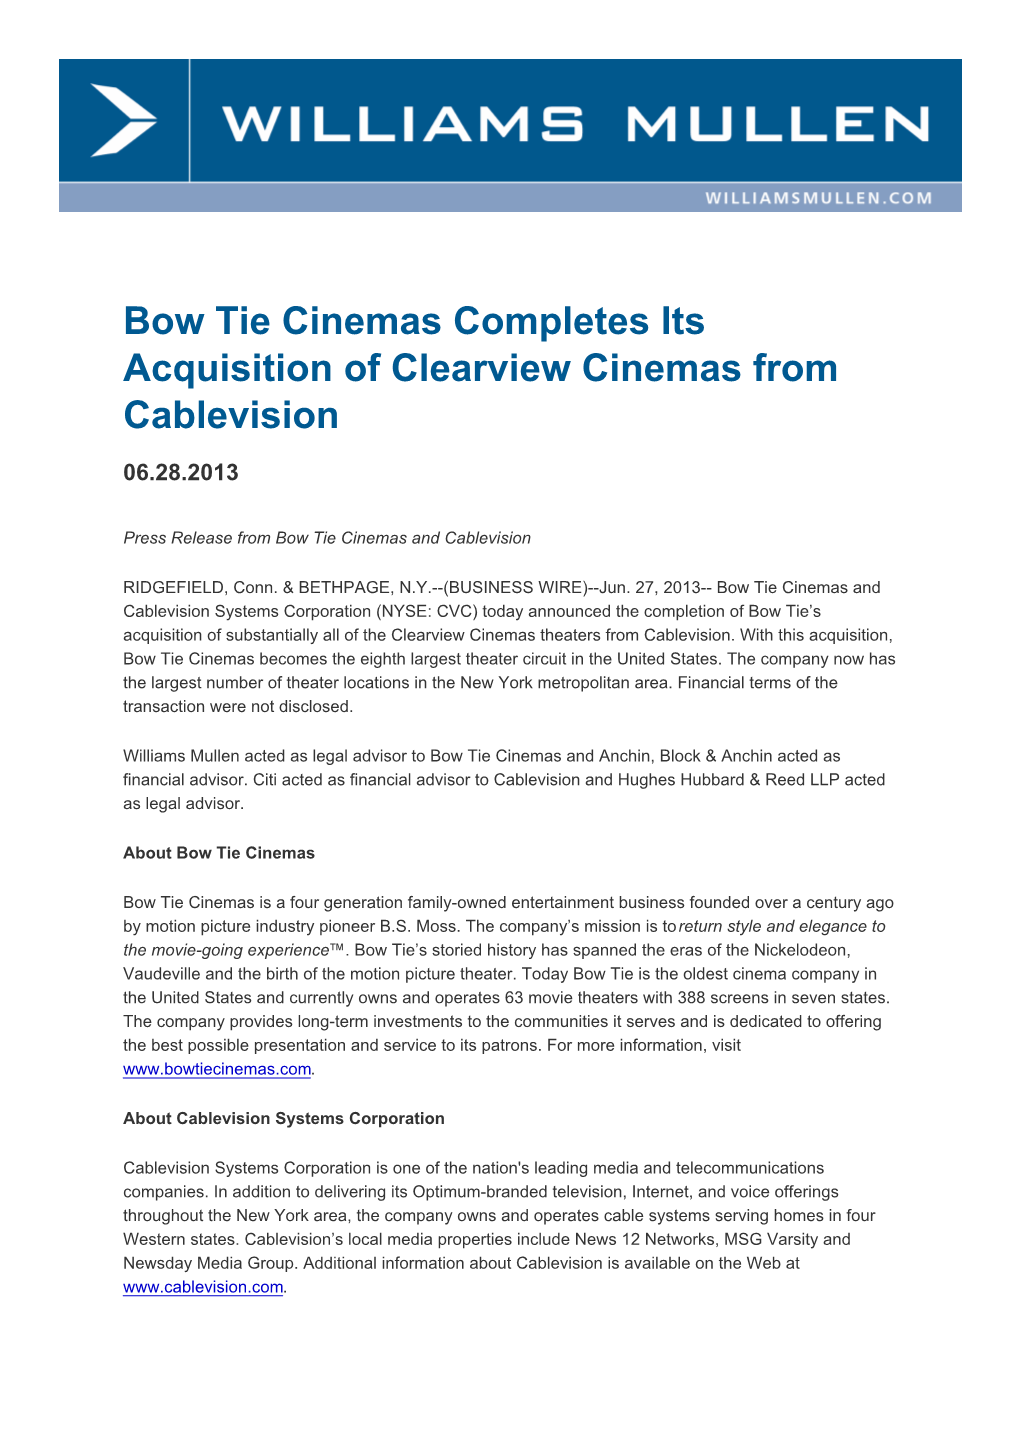 Bow Tie Cinemas Completes Its Acquisition of Clearview Cinemas from Cablevision